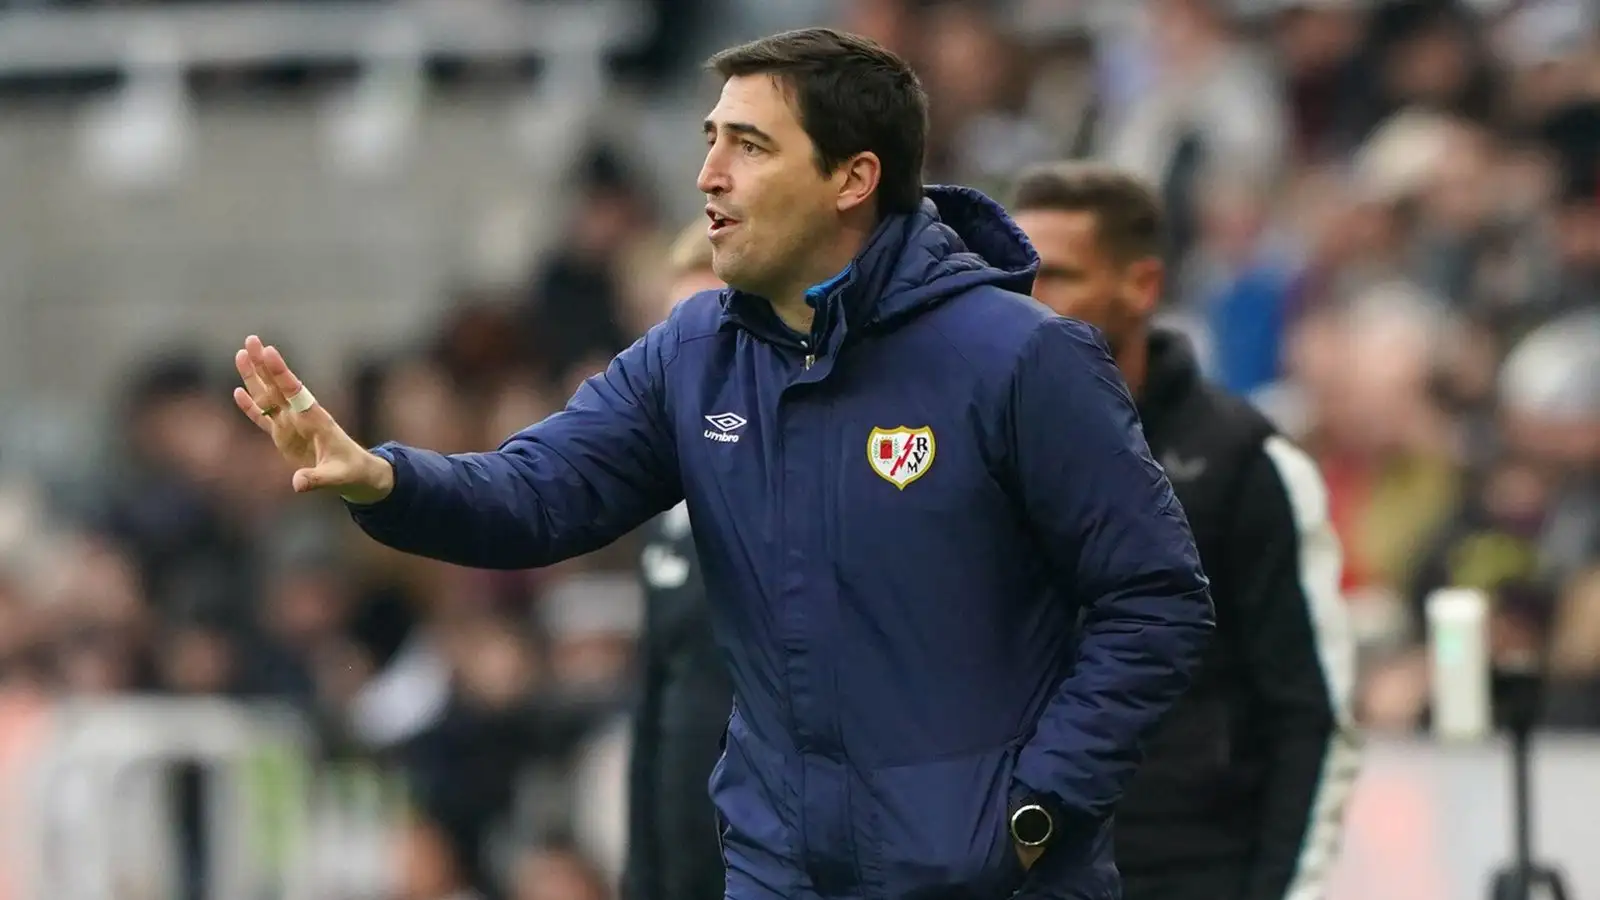 Leeds target Andoni Iraola shouts instructions at his team